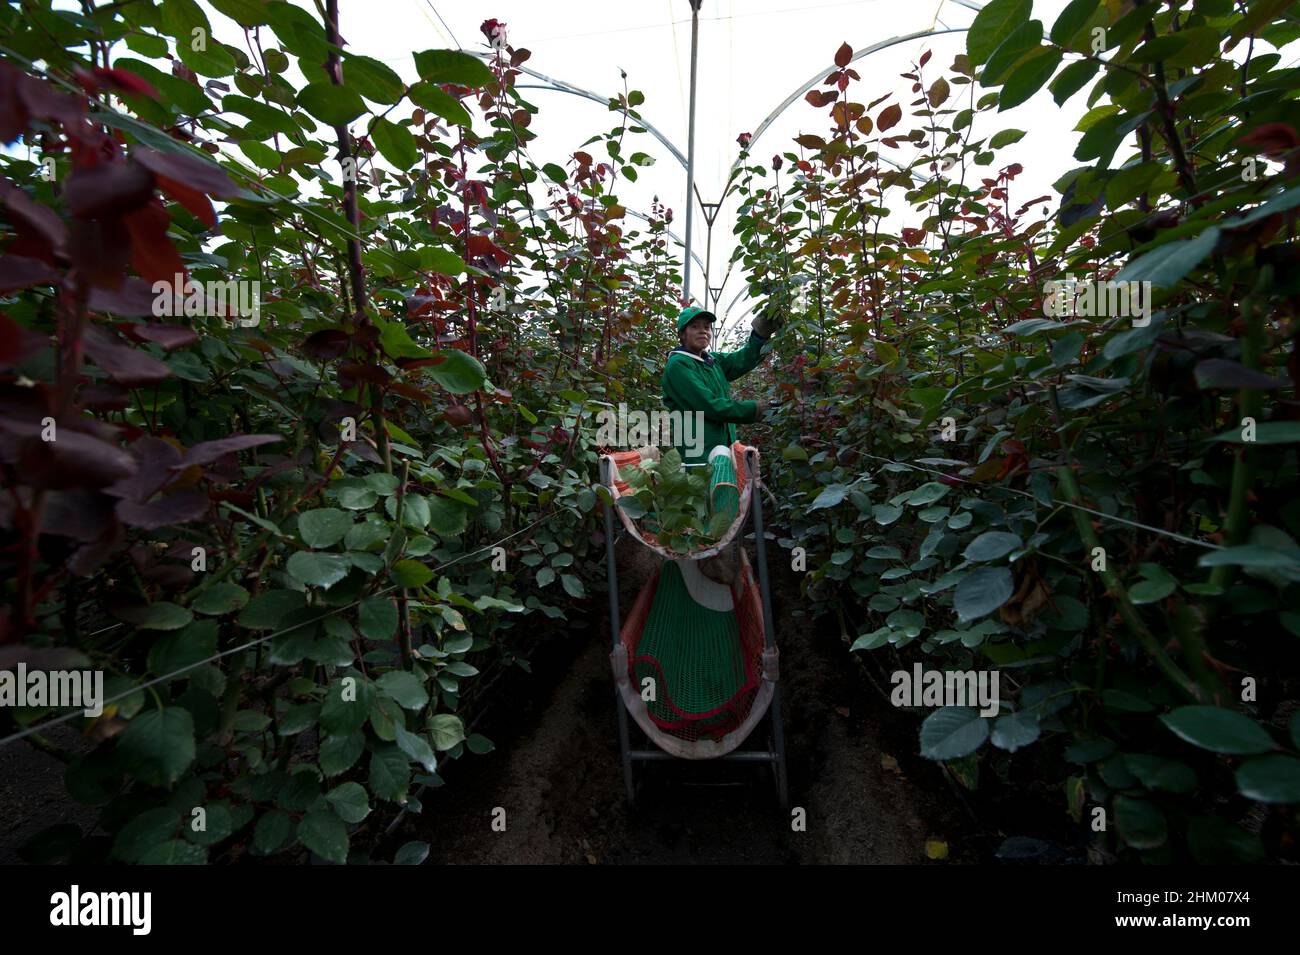 Santa Rosa, Cayambe  Ecuador - December 8, 2010: Plantation workers pack roses during the harvest period Stock Photo